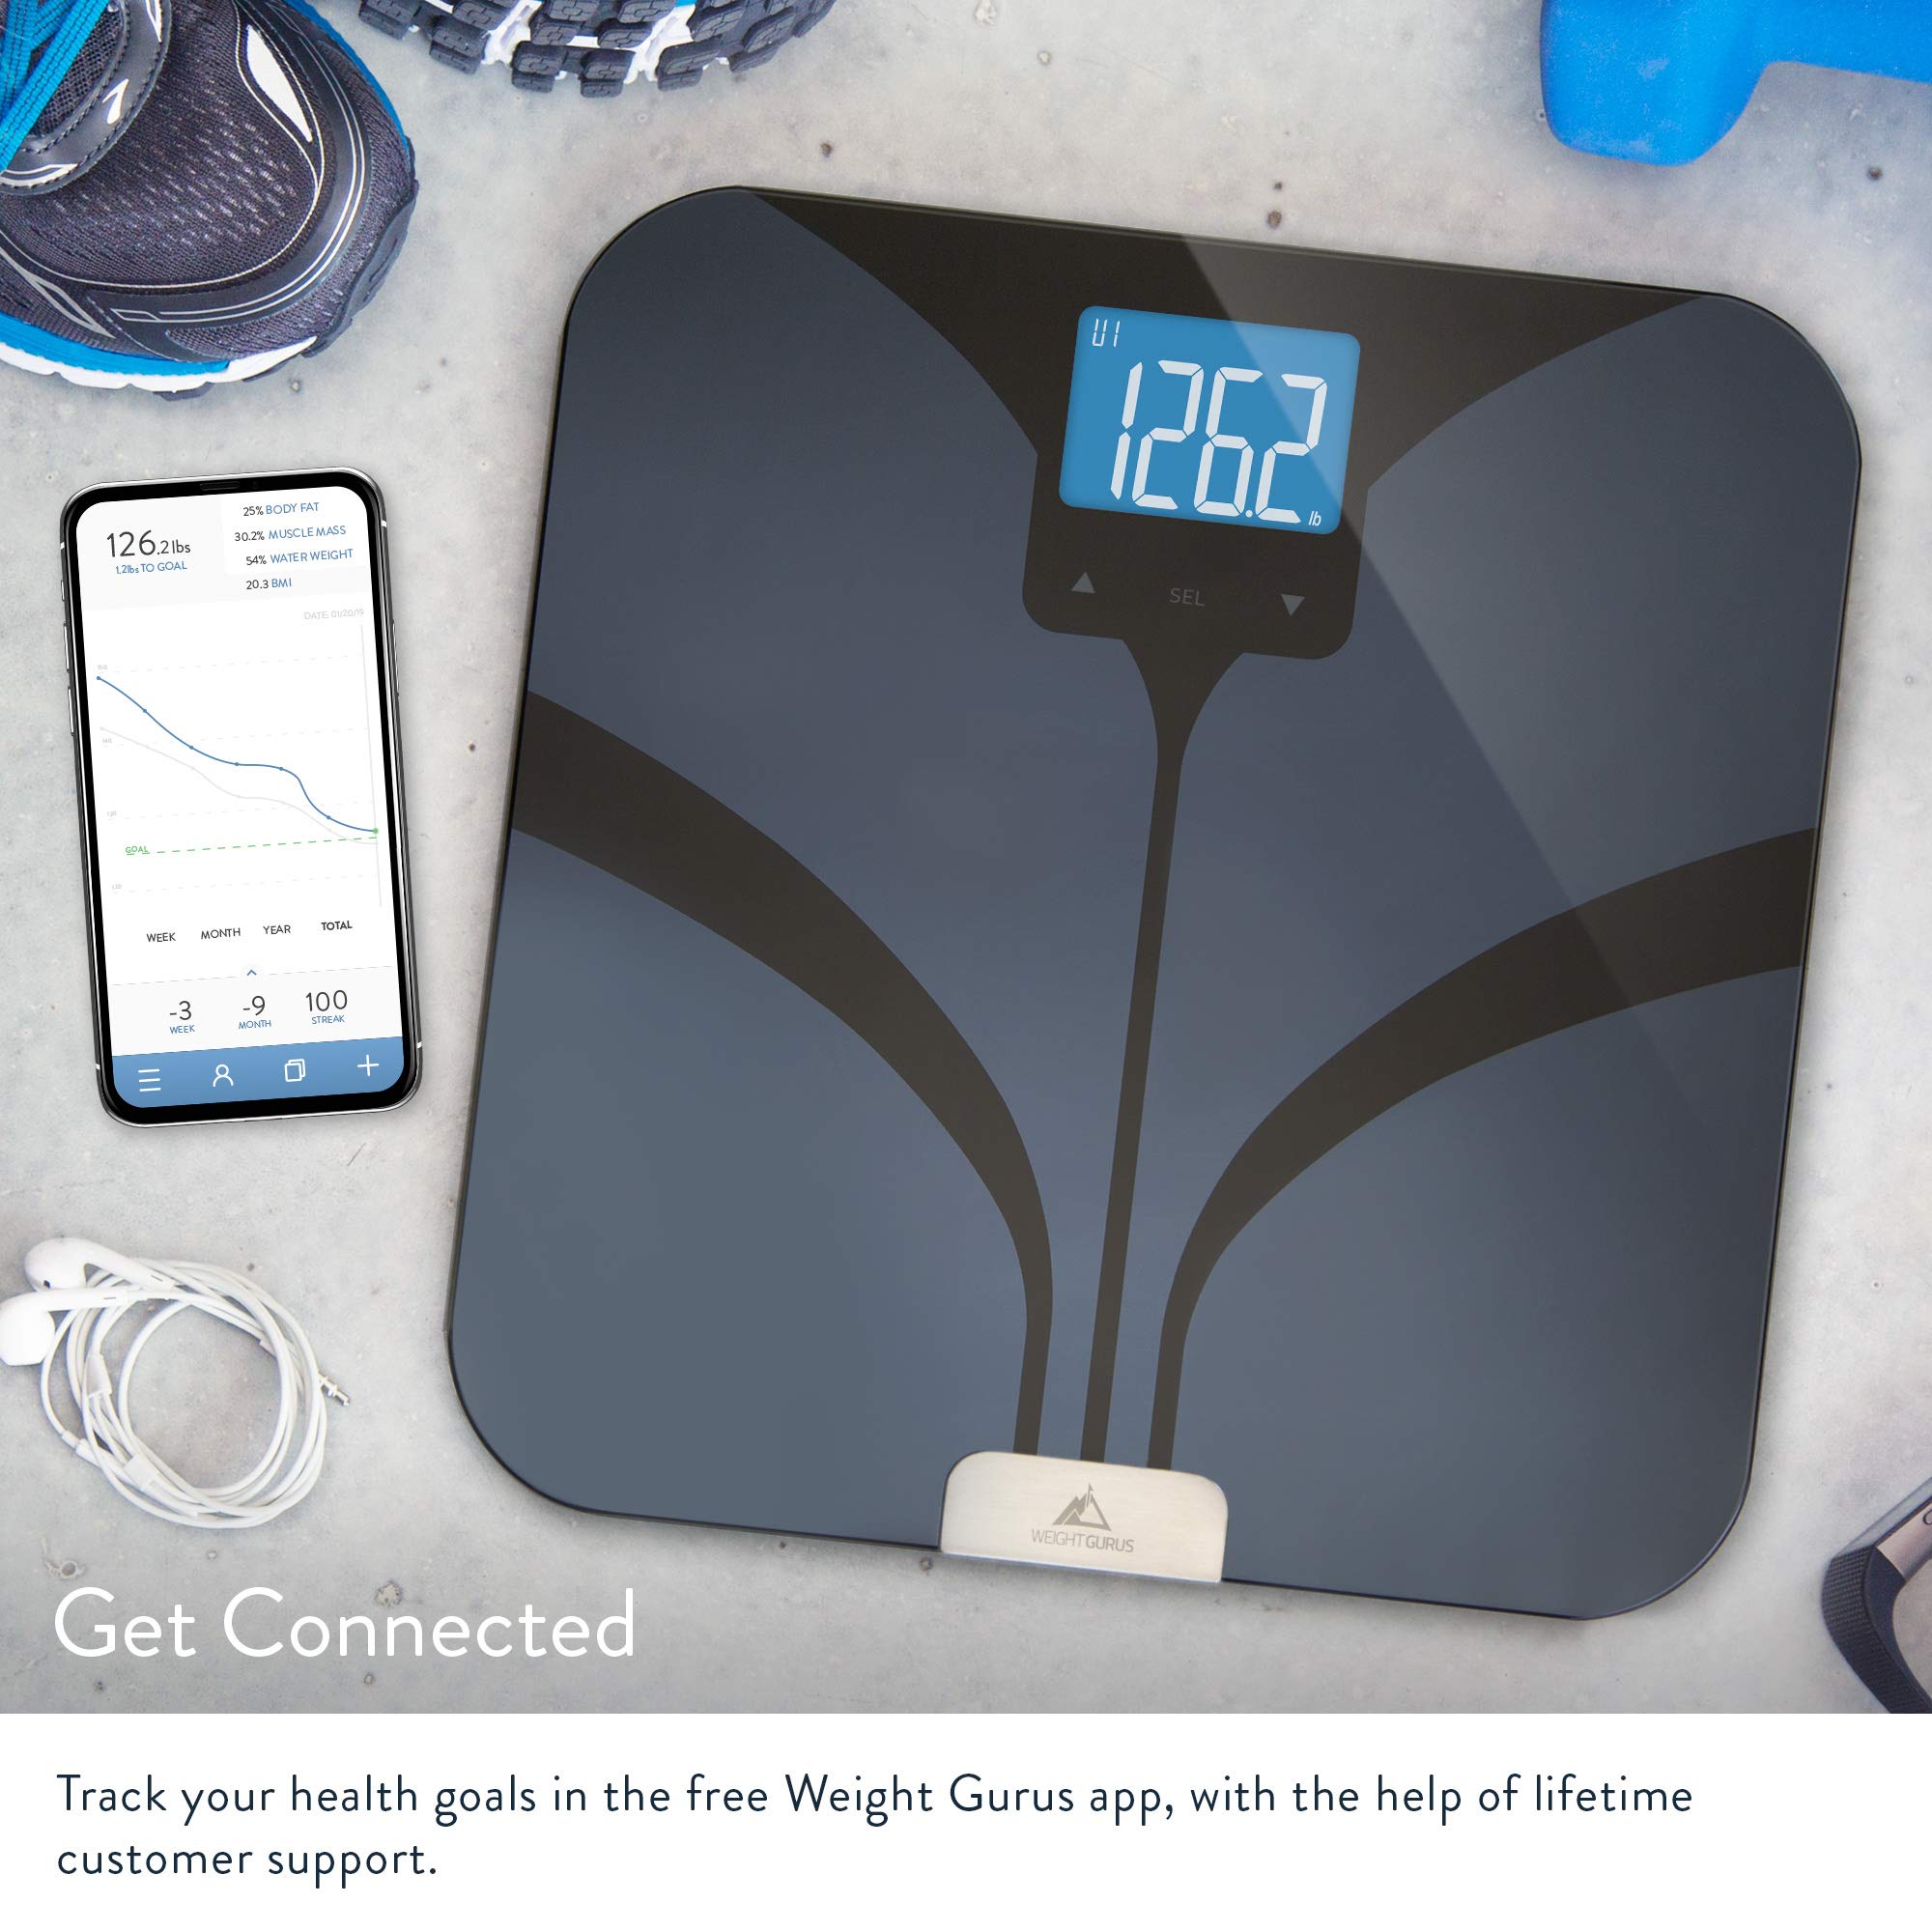 Greater Goods Bluetooth Connected Bathroom Smart Scale, Measures & Tracks BMI, Lean Mass, Water Weight & Bone Mass, Extra-Large, Backlit LCD Screen, Auto-Calibration & Auto-Off - image 3 of 5